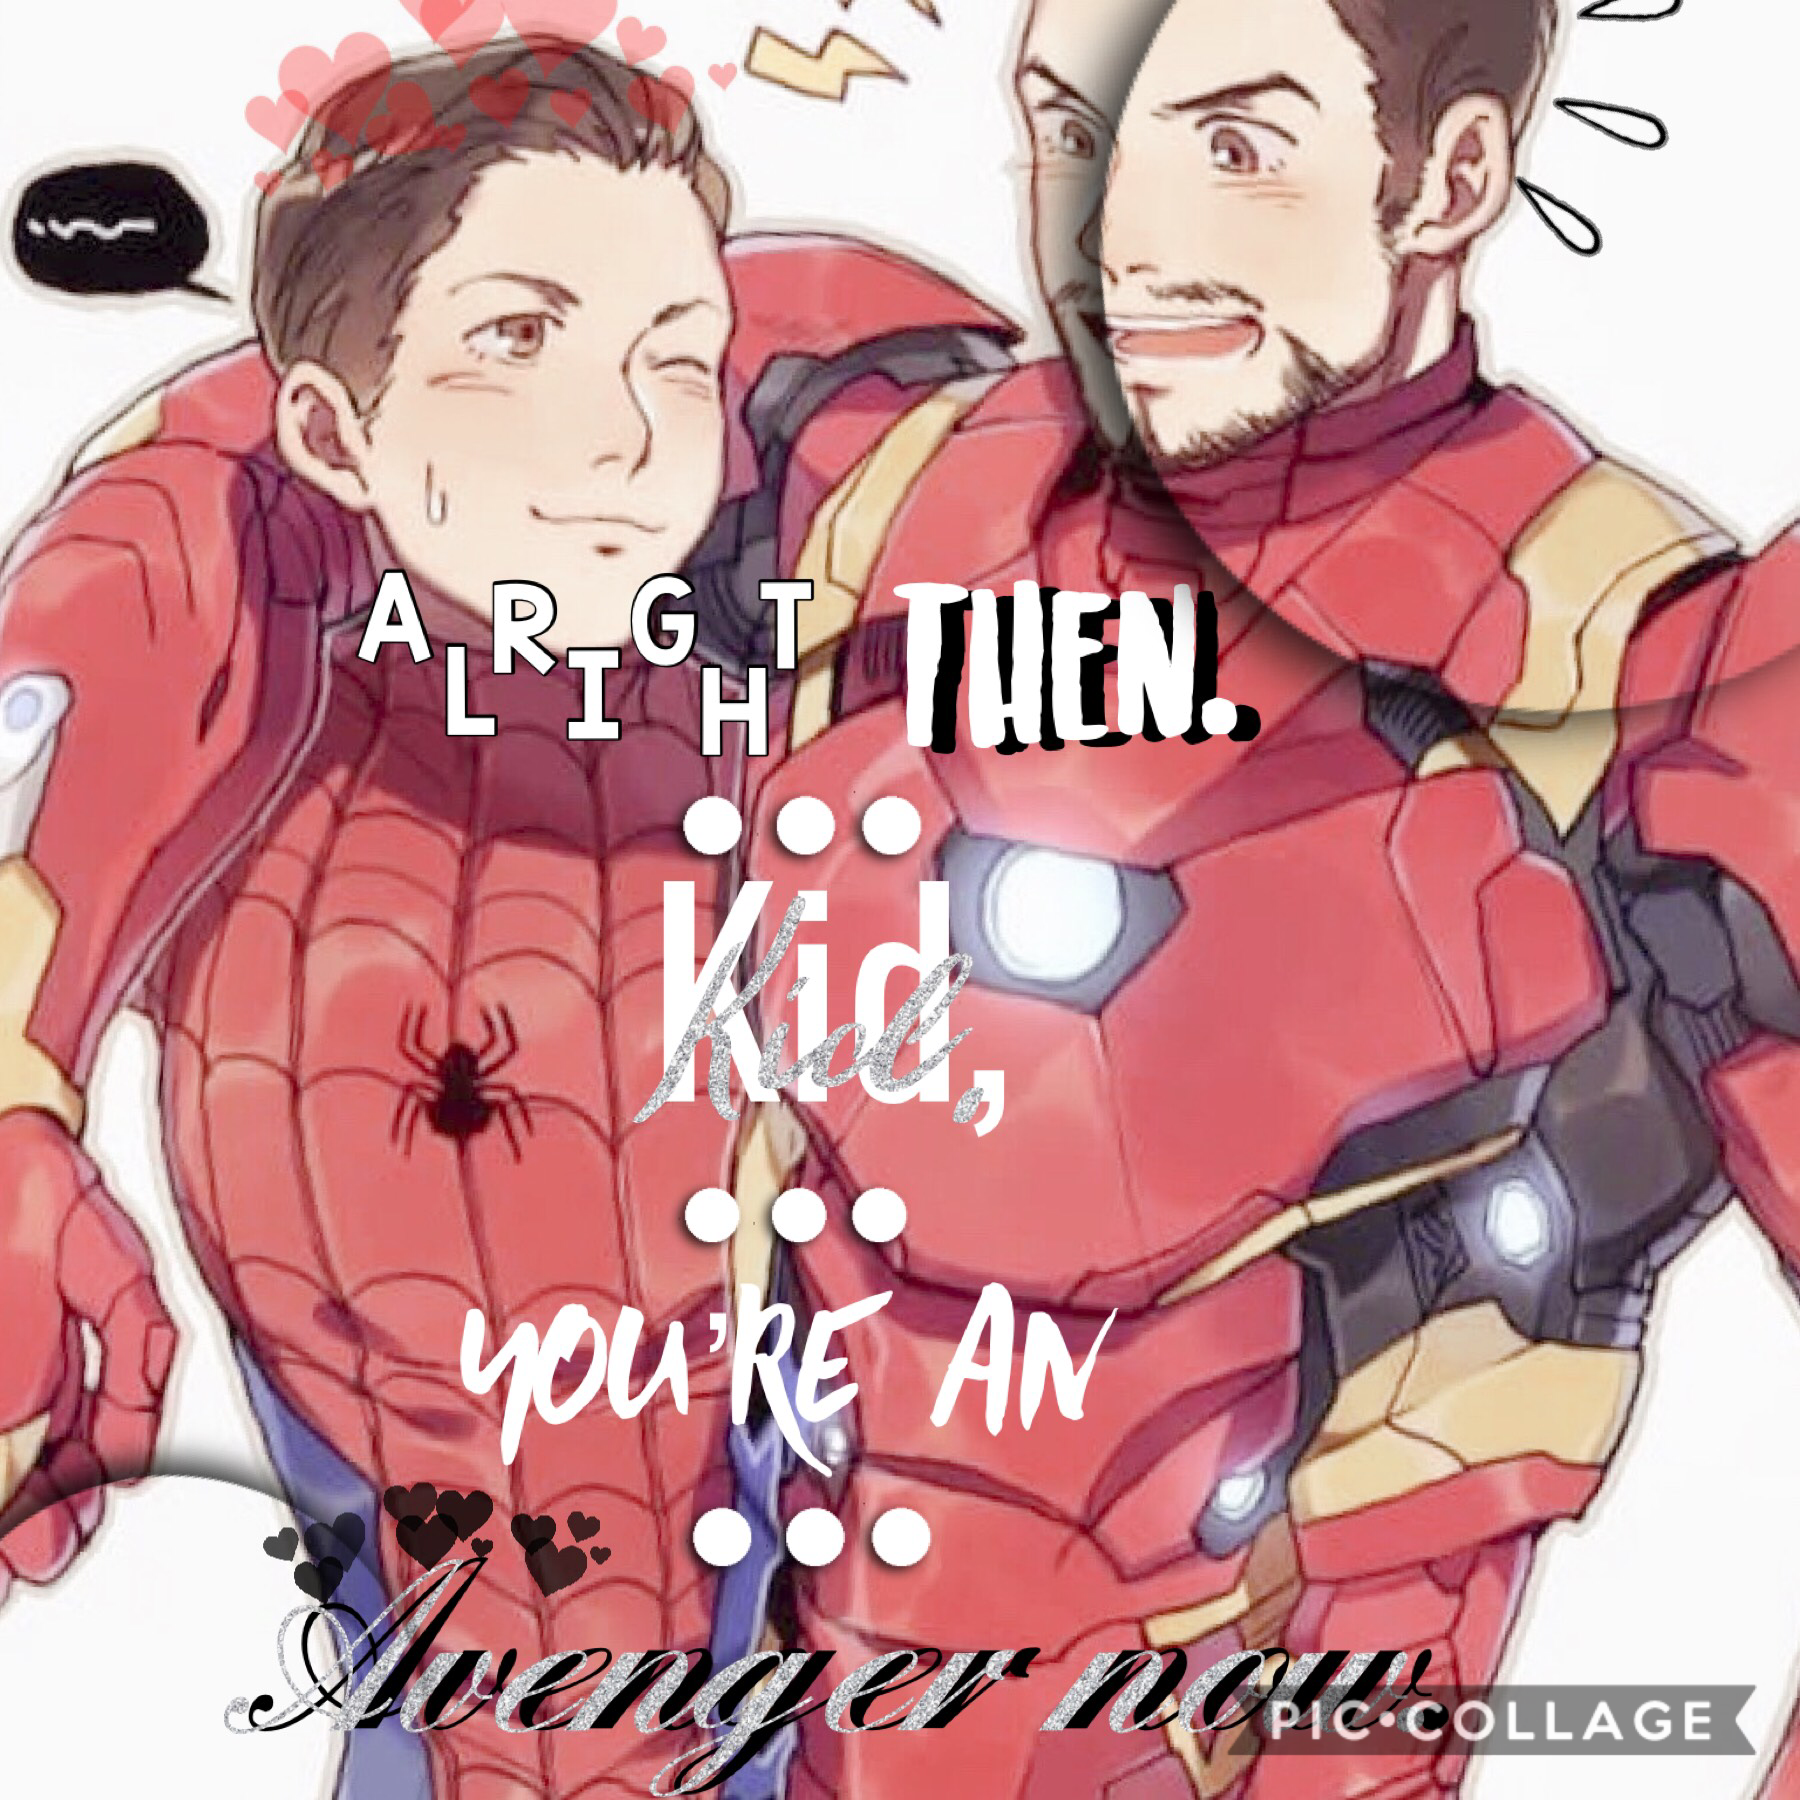 Theme: Peter Parker (Tapppp)
So guys, it was actually suggested that I use this picture by one of my followers (thank u!!! ❤️❤️) and I just wanted to let y’all know, I’m totally open to suggestions so if u have any, please remix a collage! I’ll be happy t